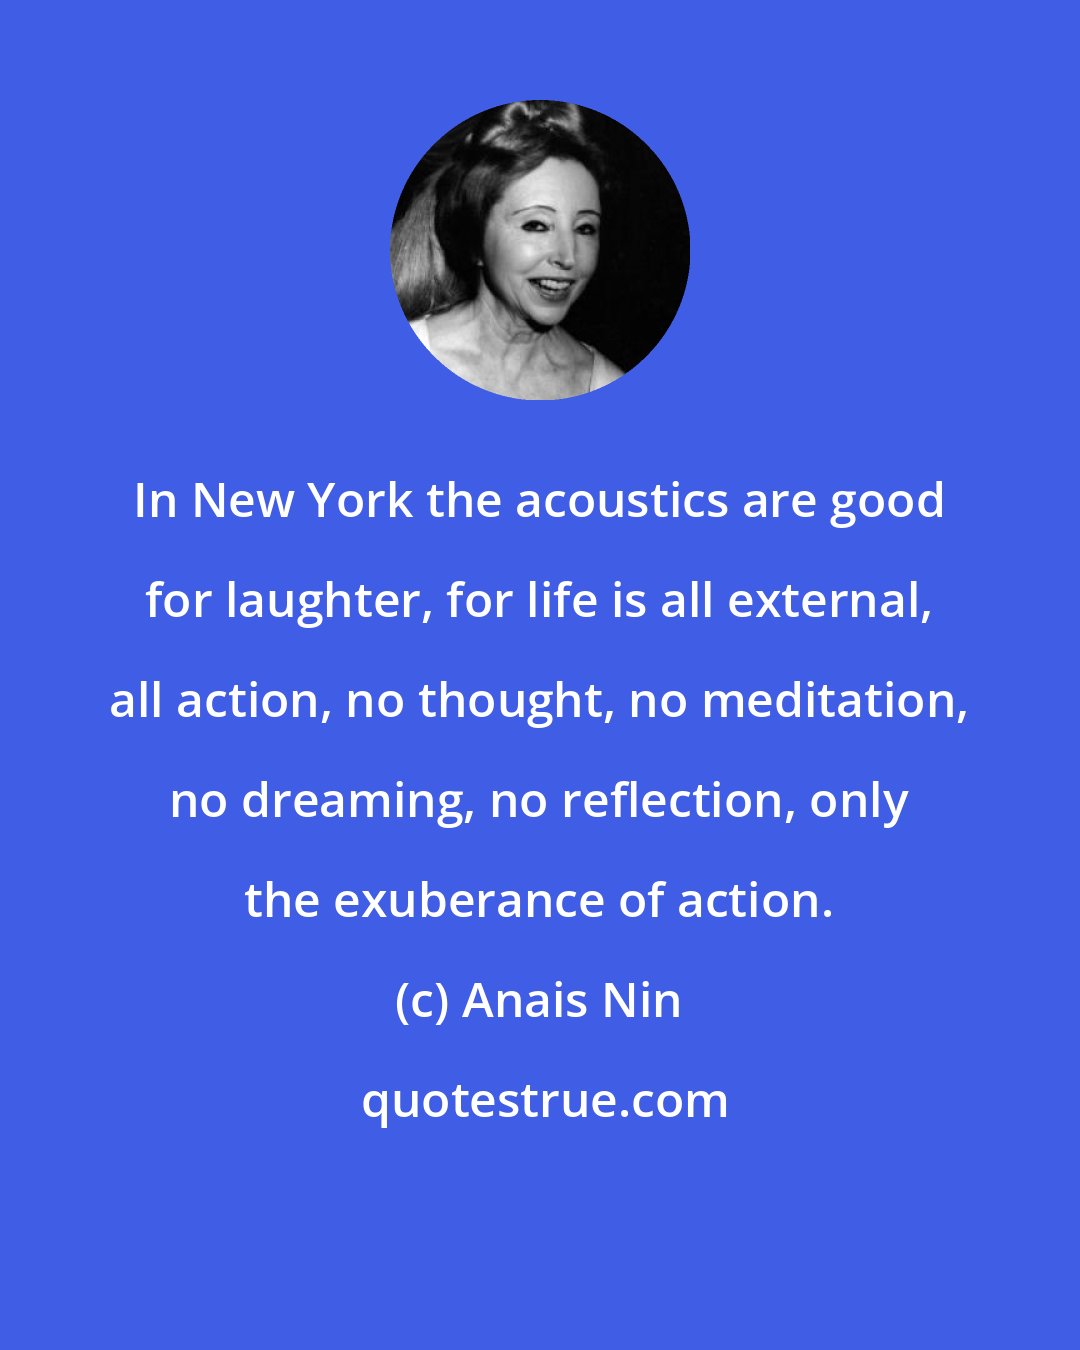 Anais Nin: In New York the acoustics are good for laughter, for life is all external, all action, no thought, no meditation, no dreaming, no reflection, only the exuberance of action.